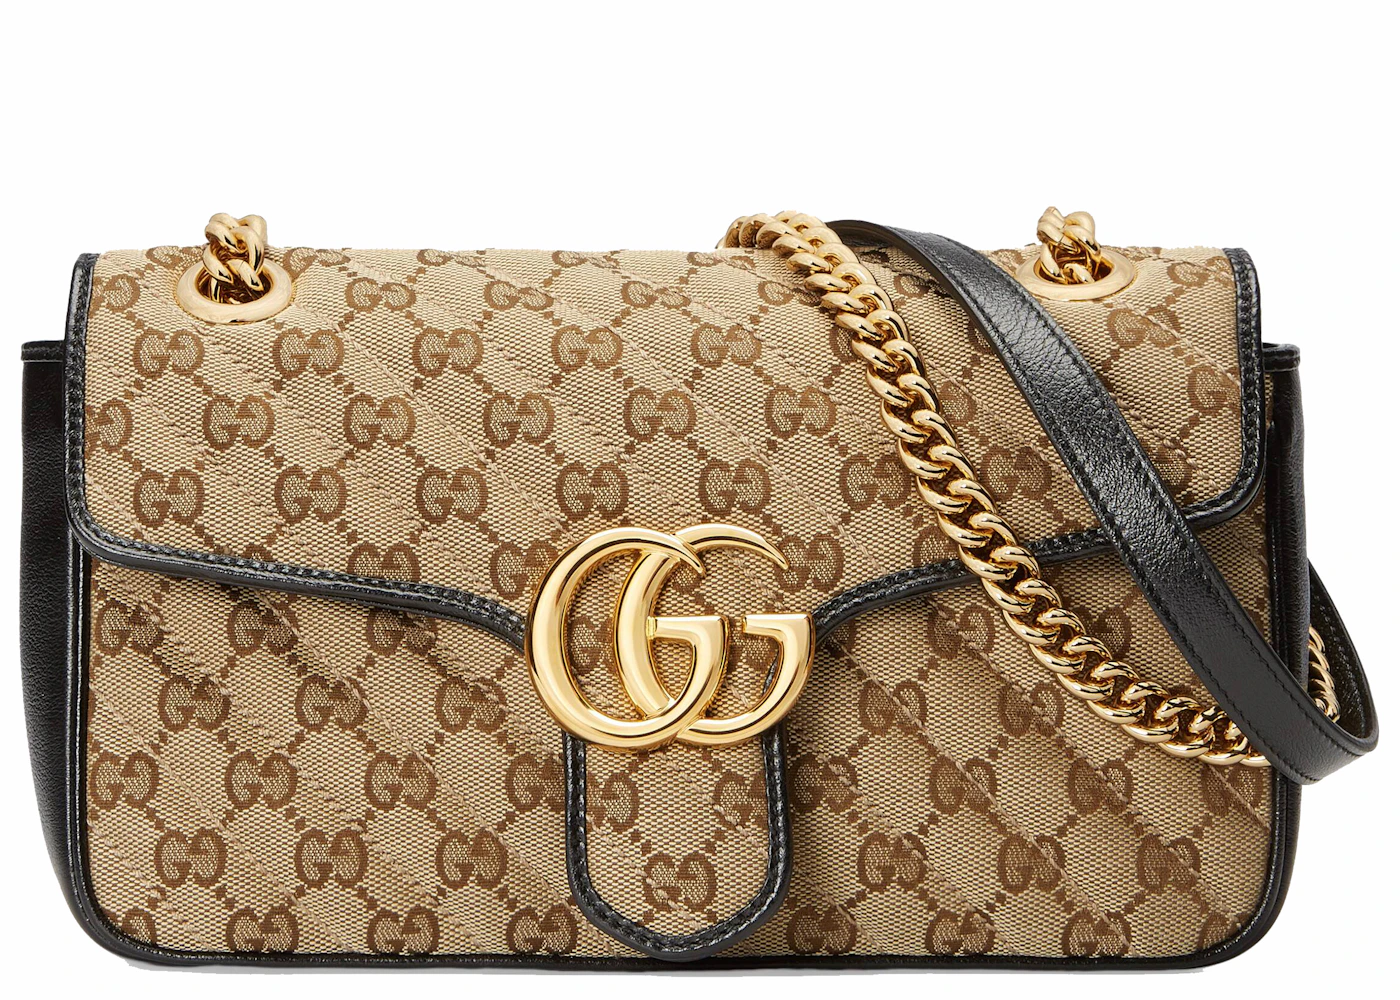 GUCCI GG Marmont Small Shoulder Bag in Original GG Canvas – COCOON